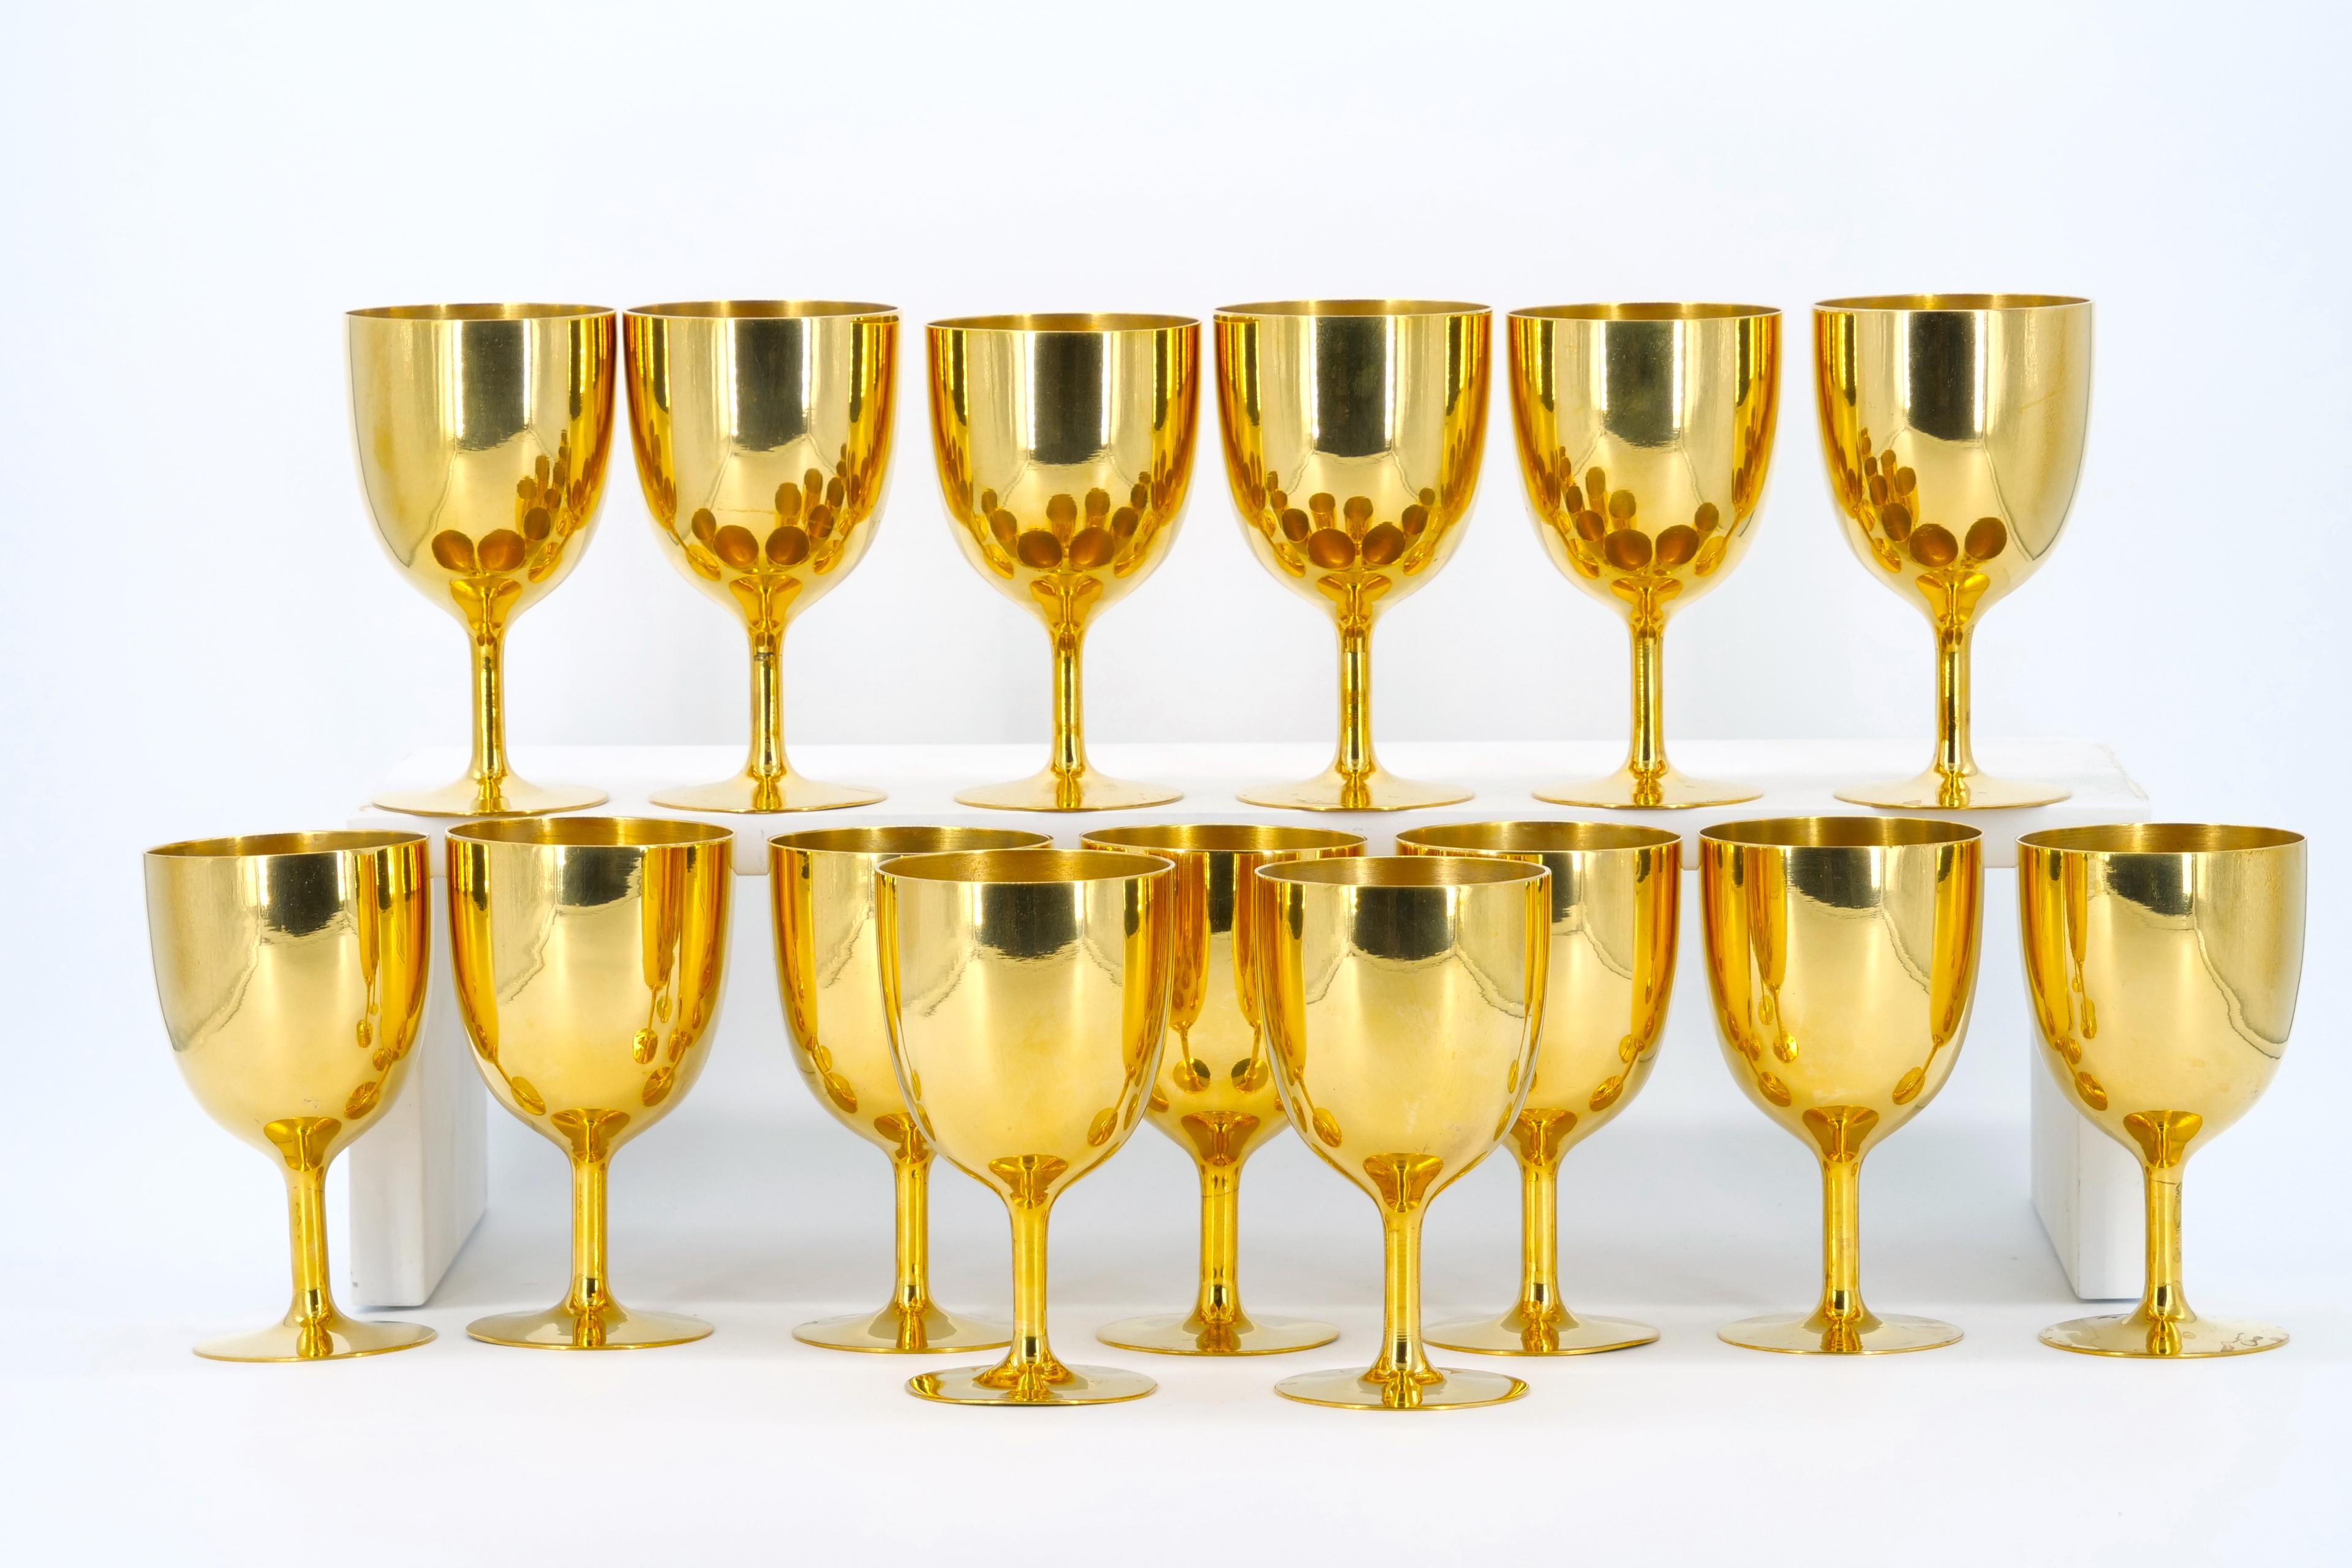 Indulge in the opulence of our exquisite English barware and tableware collection with this stunning set of silver-plated and gilded aperitif / liquor goblets, designed to elevate your dining experience to new heights. Meticulously crafted to the